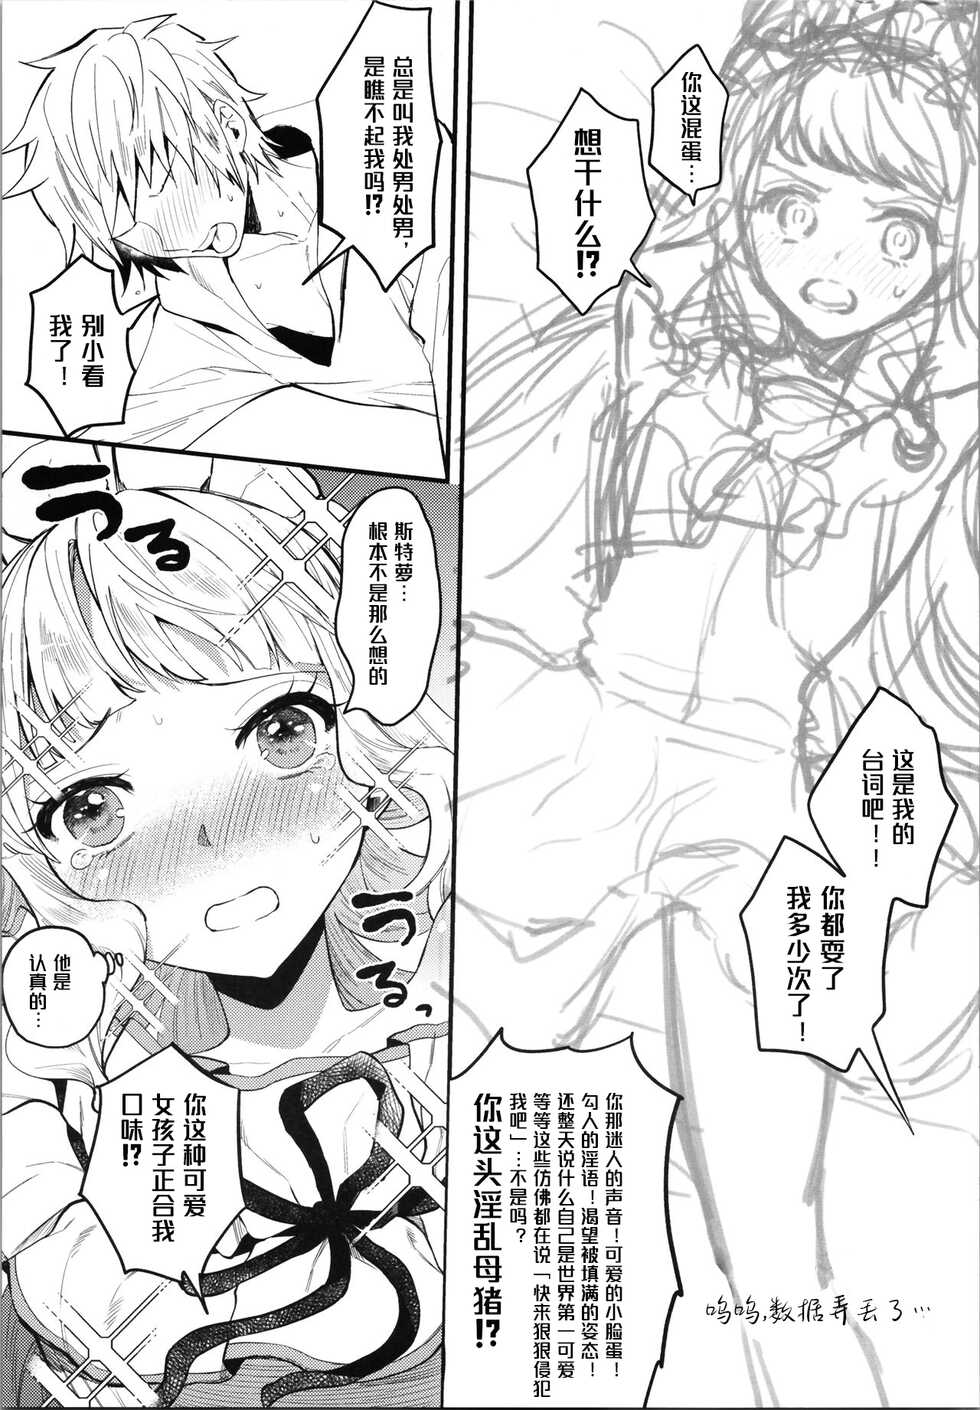 (C96) [Chimple Hotters (Chimple Hotter)] Cagliostro to Ichaicha Ecchi Suru | 与卡莉奥斯特罗没羞没臊地H性爱 (Granblue Fantasy) [Chinese] [hEROs汉化组] - Page 6